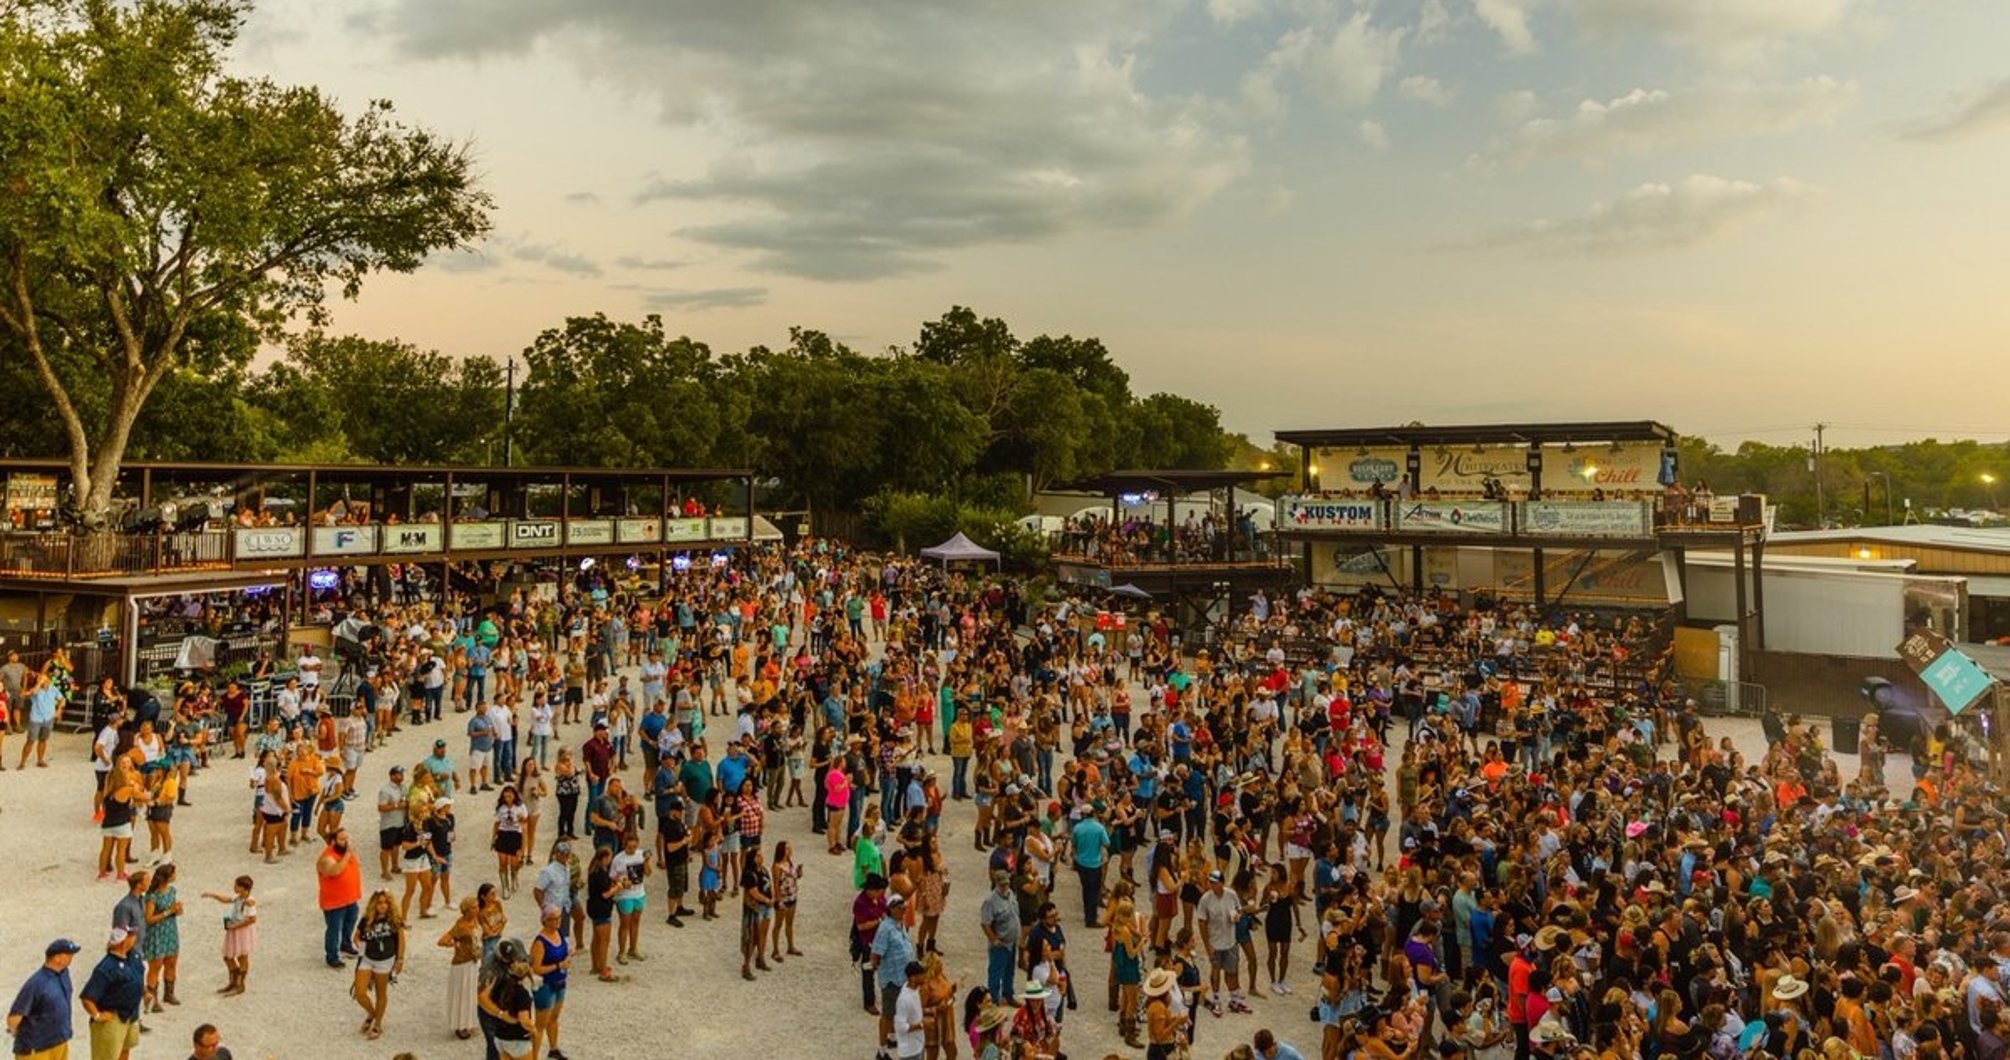 Whitewater Amphitheater  Live Music in New Braunfels, Texas